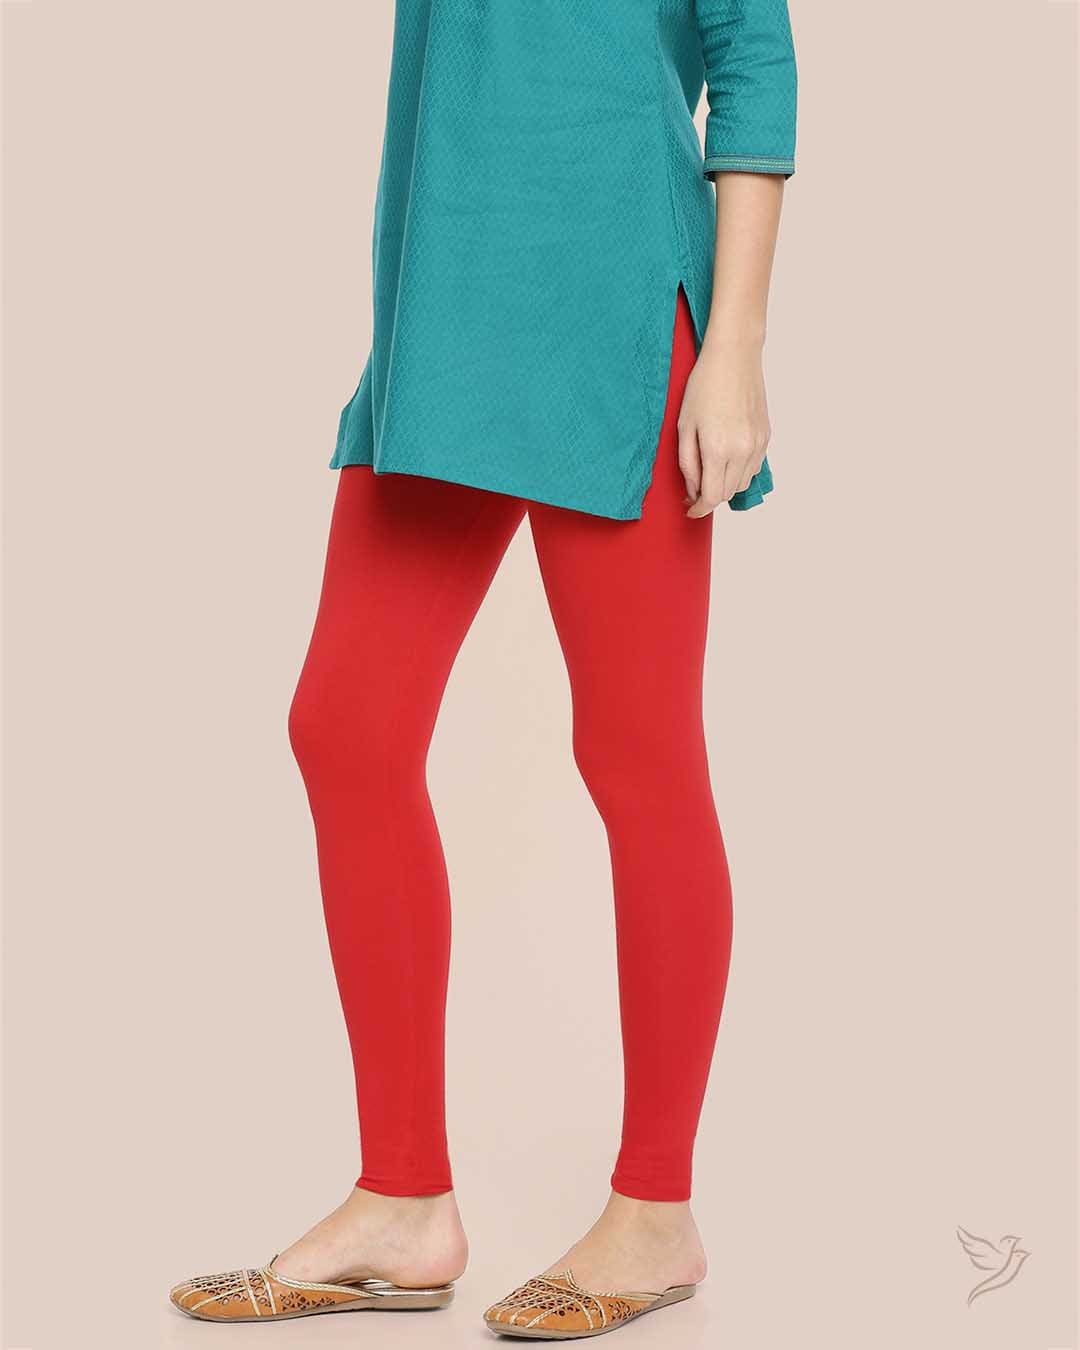 Red Chilli Cotton Ankle Legging for Women